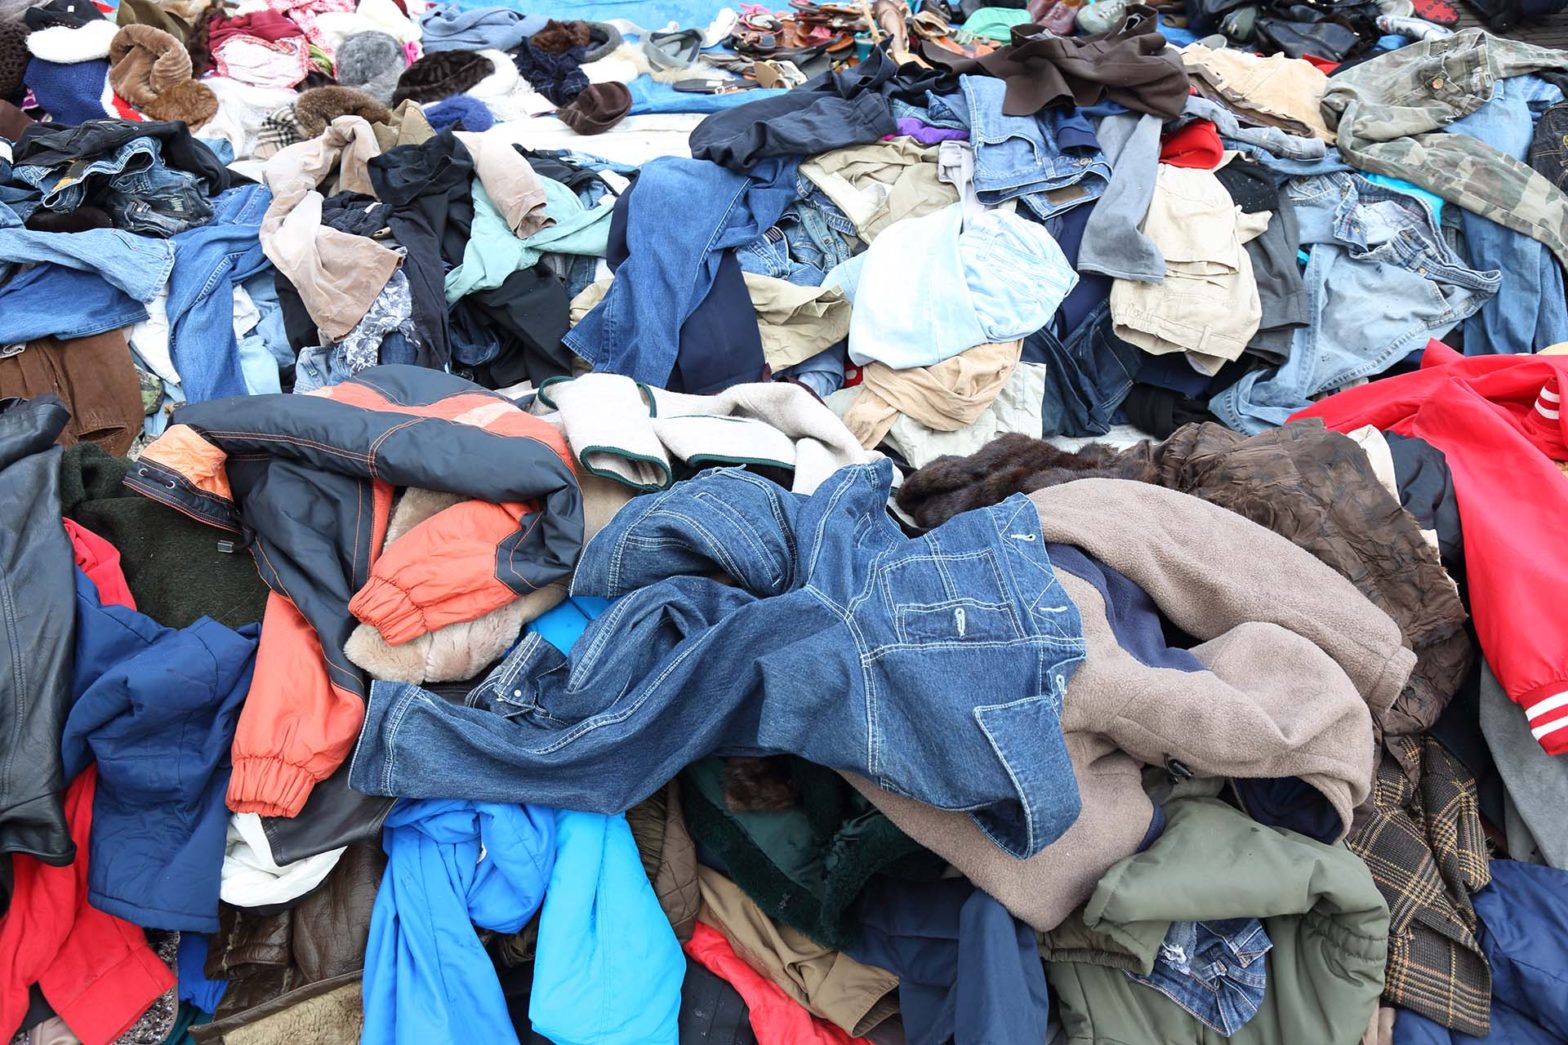 clothing landfill, what to do with old clothes, reuse old clothes, reduce clothing waste